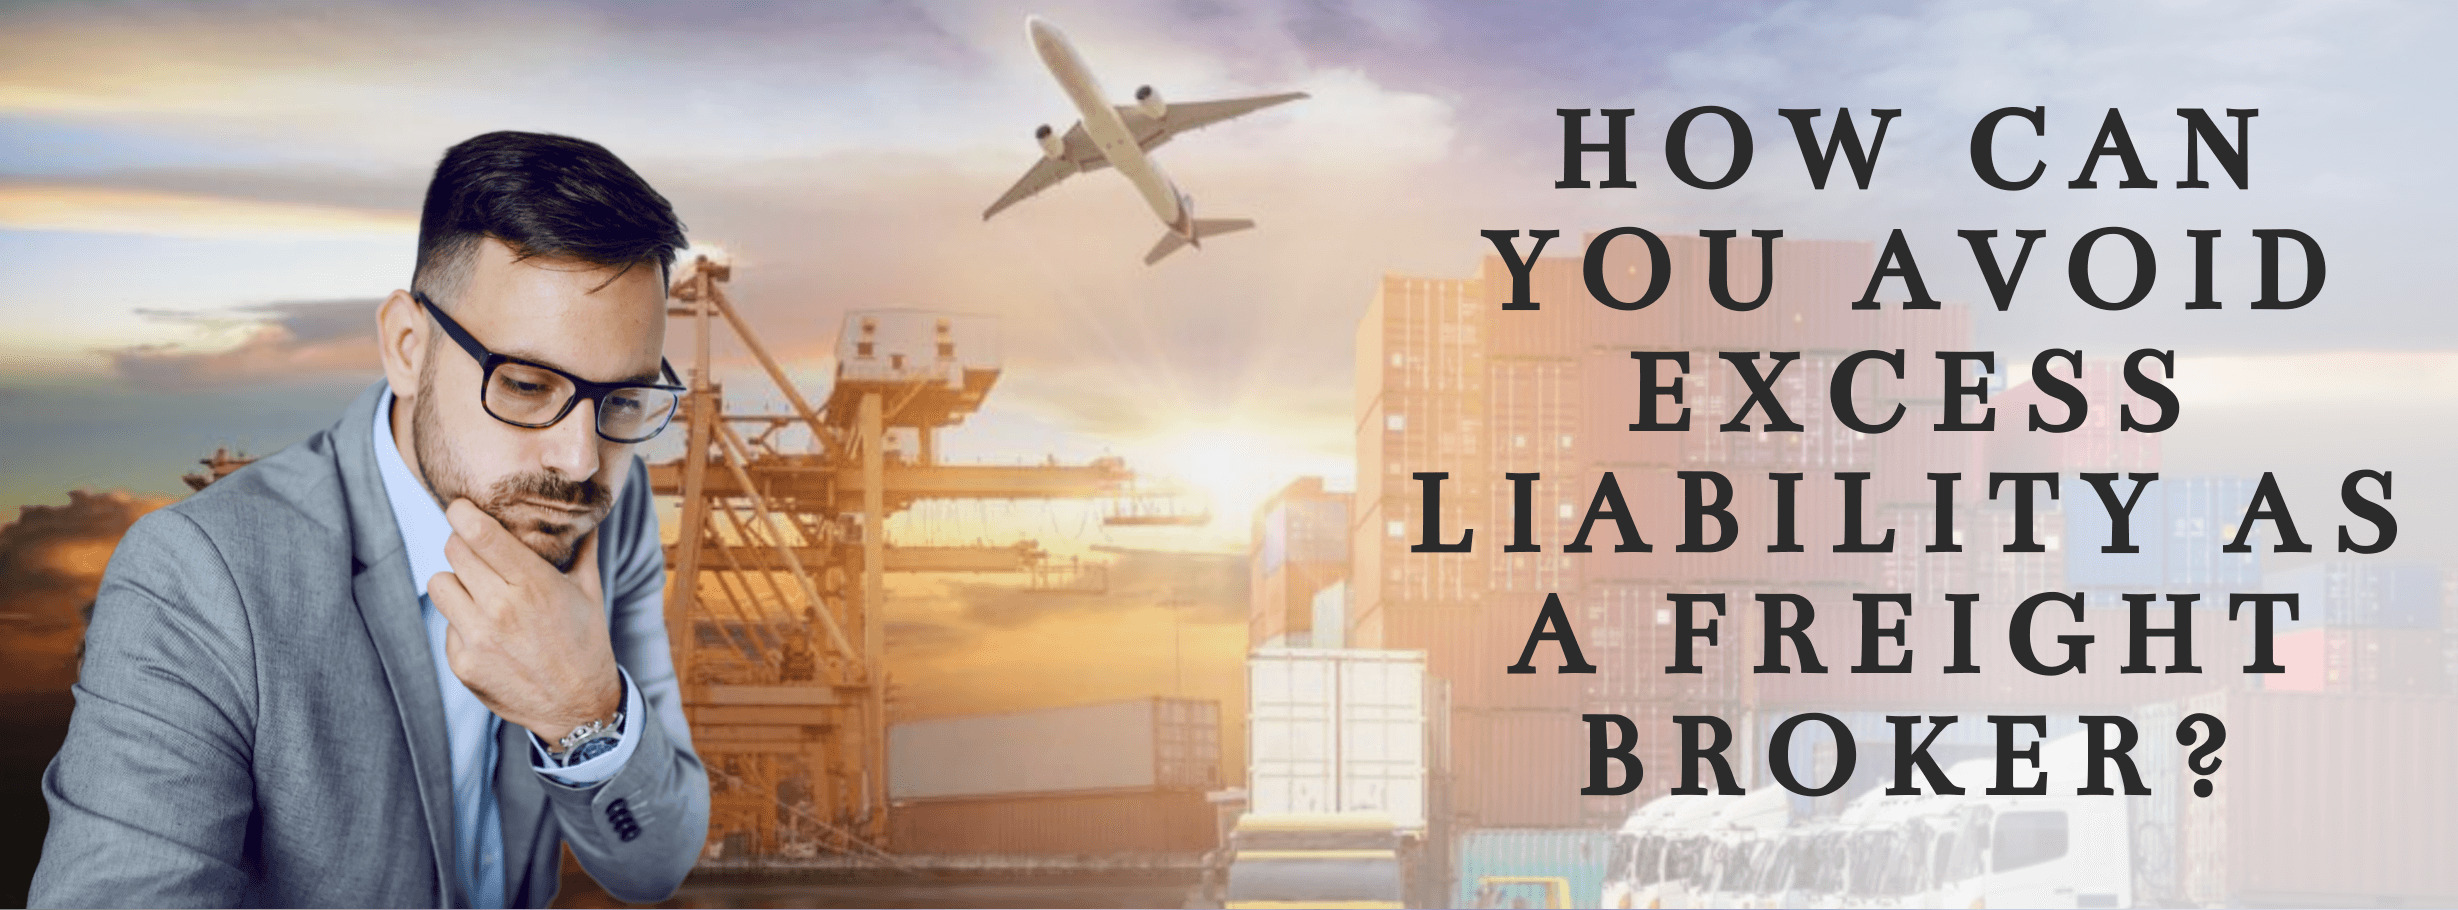 How Freight Brokers Can Avoid Excess Liability